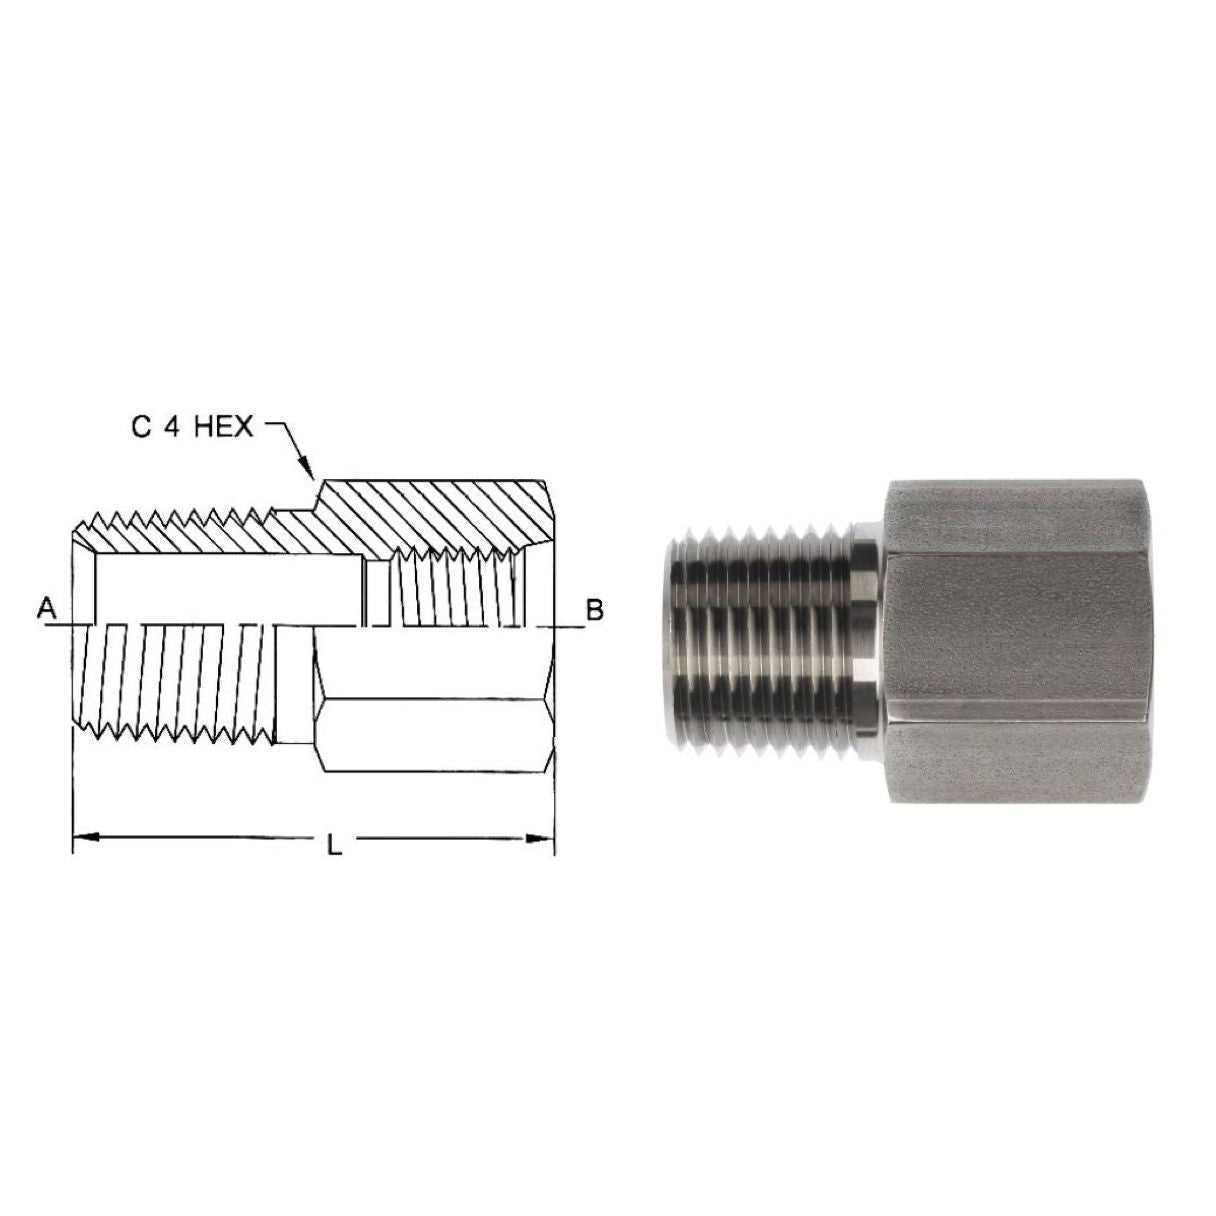 6404-10-08 : OneHydraulics Adapter, Straight, 0.625 (5/8") Female ORB x 0.5 (1/2") Male, Steel, 4500psi